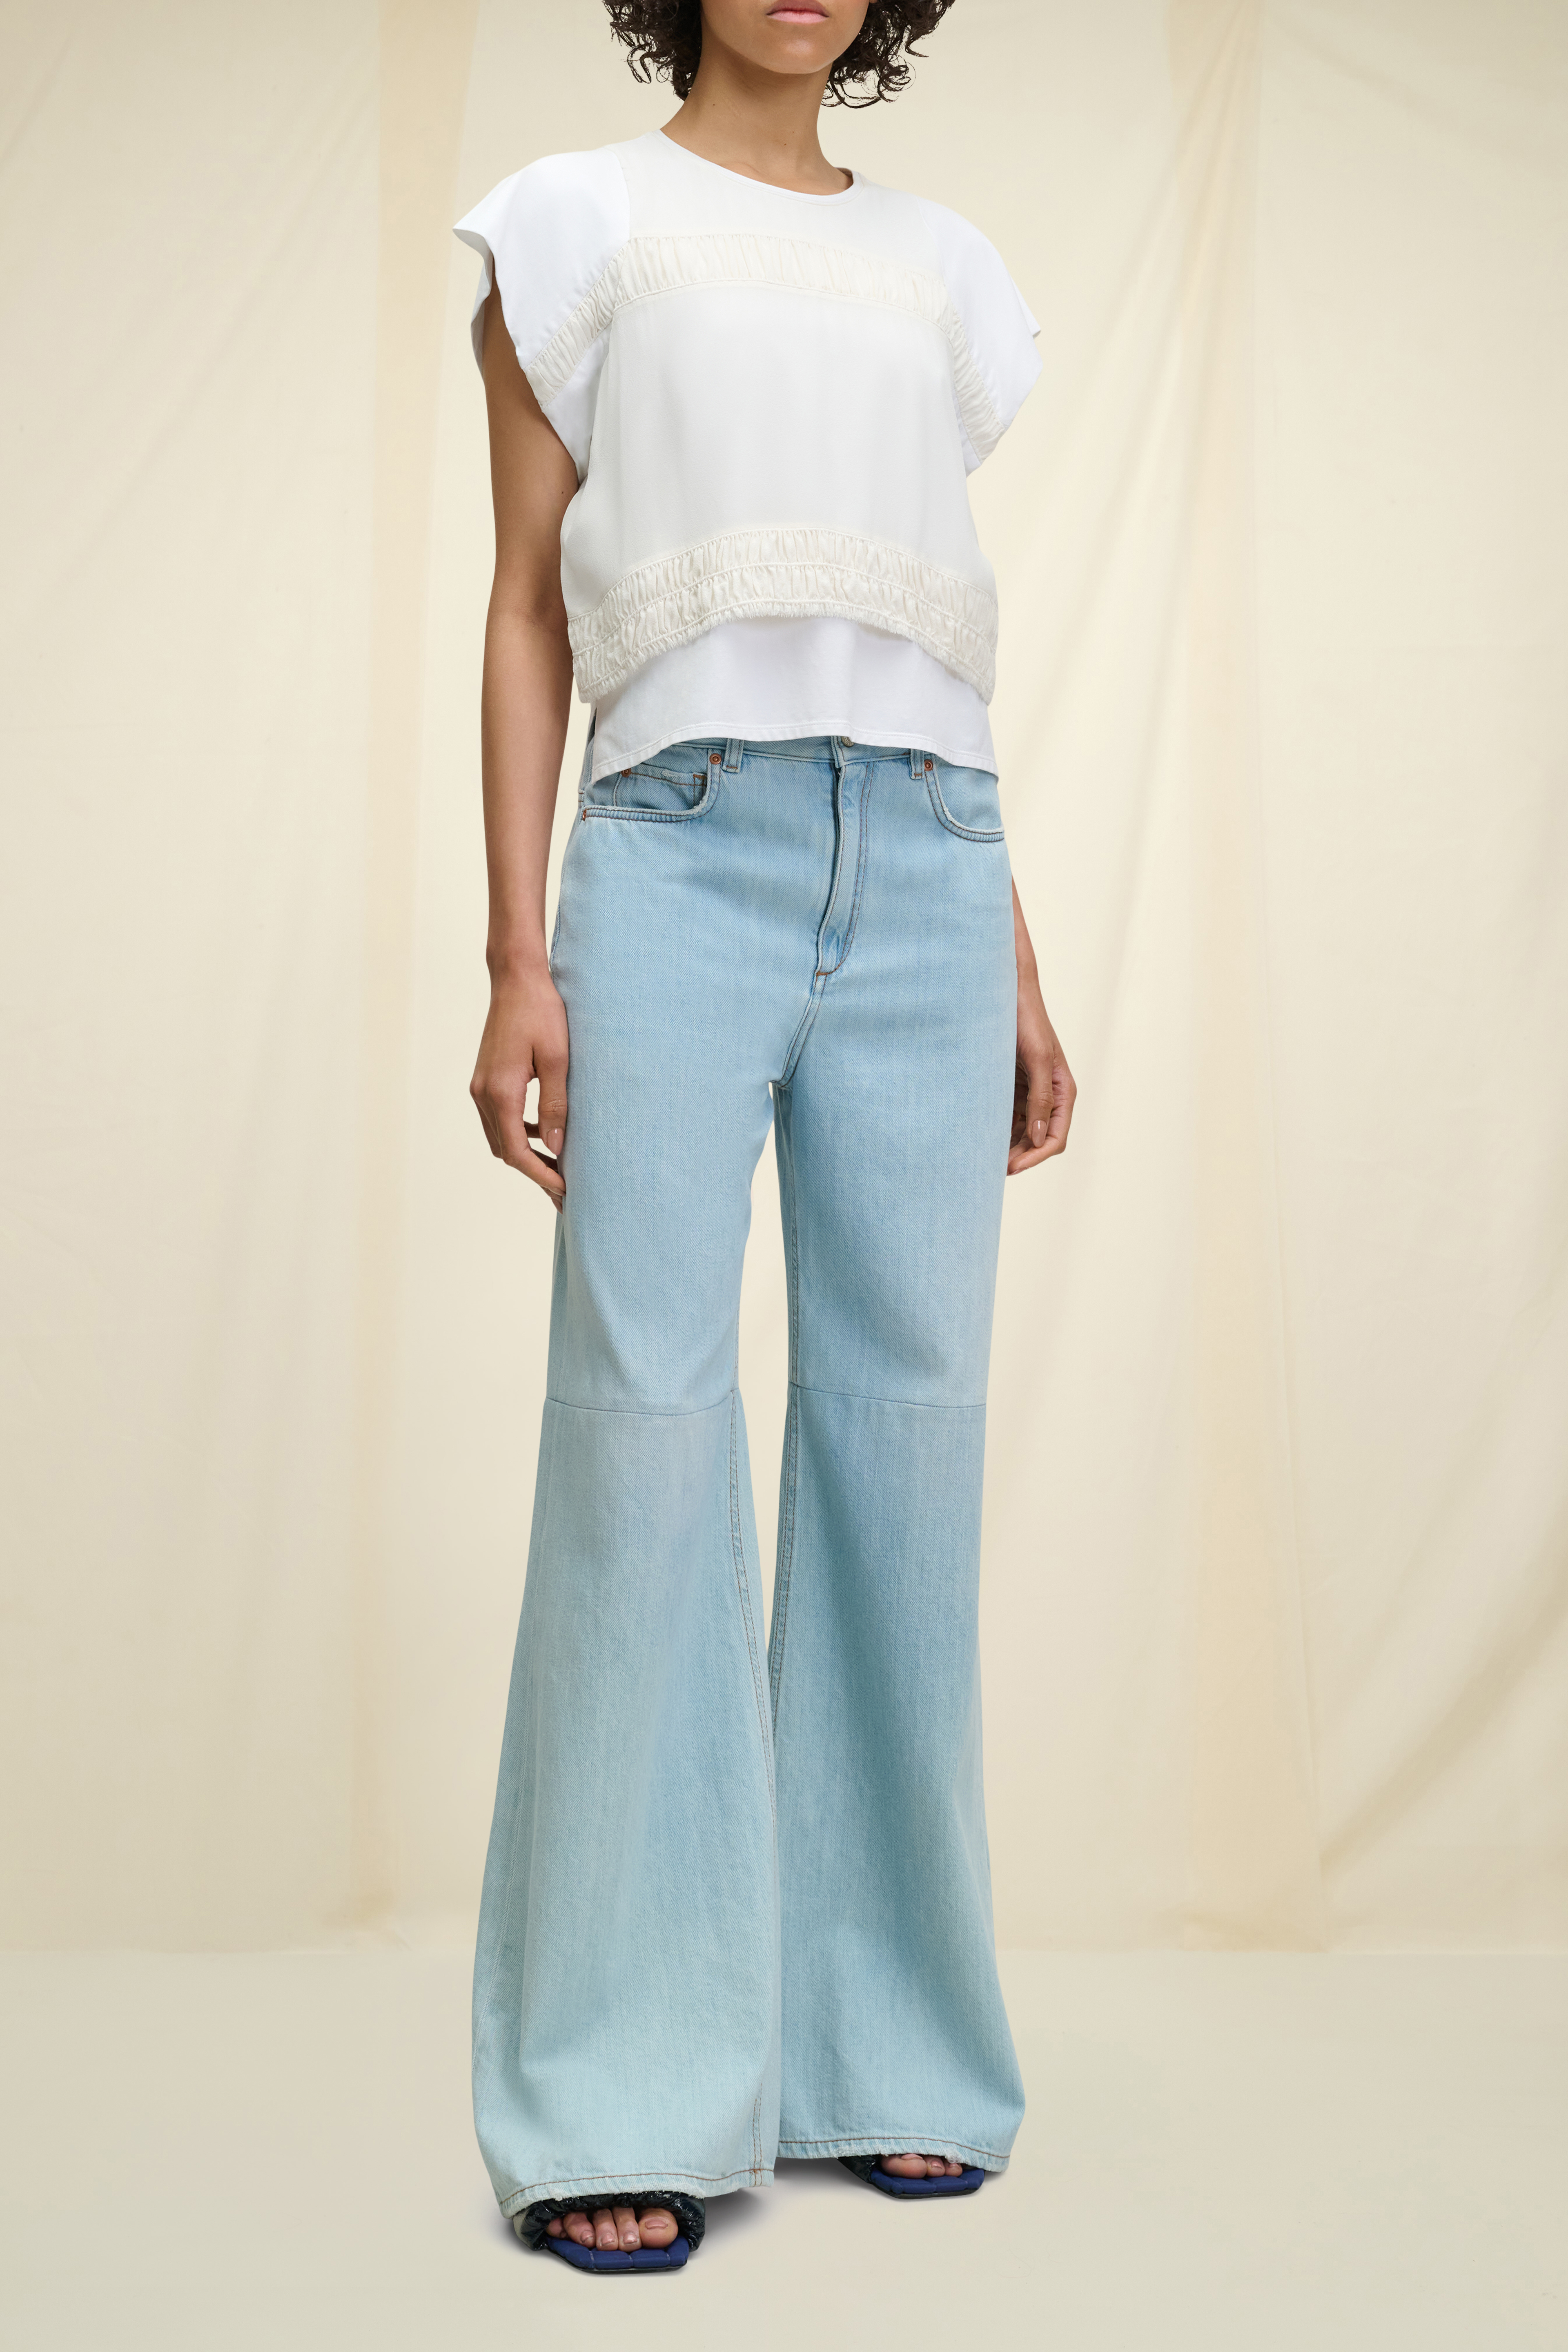 Dorothee Schumacher Top with smoked